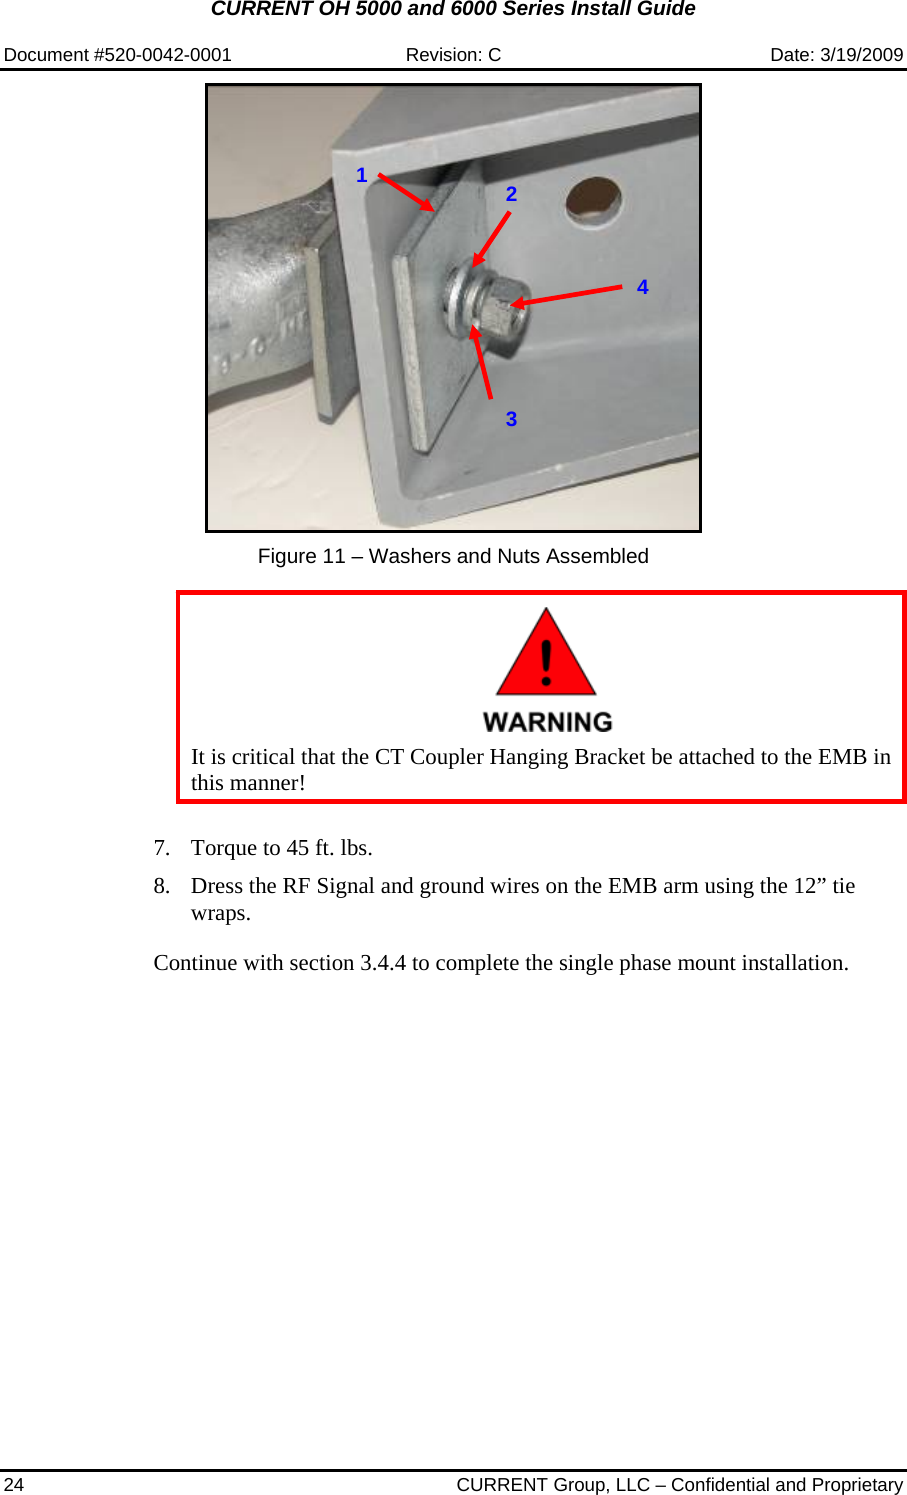 CURRENT OH 5000 and 6000 Series Install Guide  Document #520-0042-0001  Revision: C  Date: 3/19/2009 24  CURRENT Group, LLC – Confidential and Proprietary    Figure 11 – Washers and Nuts Assembled     It is critical that the CT Coupler Hanging Bracket be attached to the EMB in this manner!   7. Torque to 45 ft. lbs.  8. Dress the RF Signal and ground wires on the EMB arm using the 12” tie wraps.   Continue with section 3.4.4 to complete the single phase mount installation.    1234